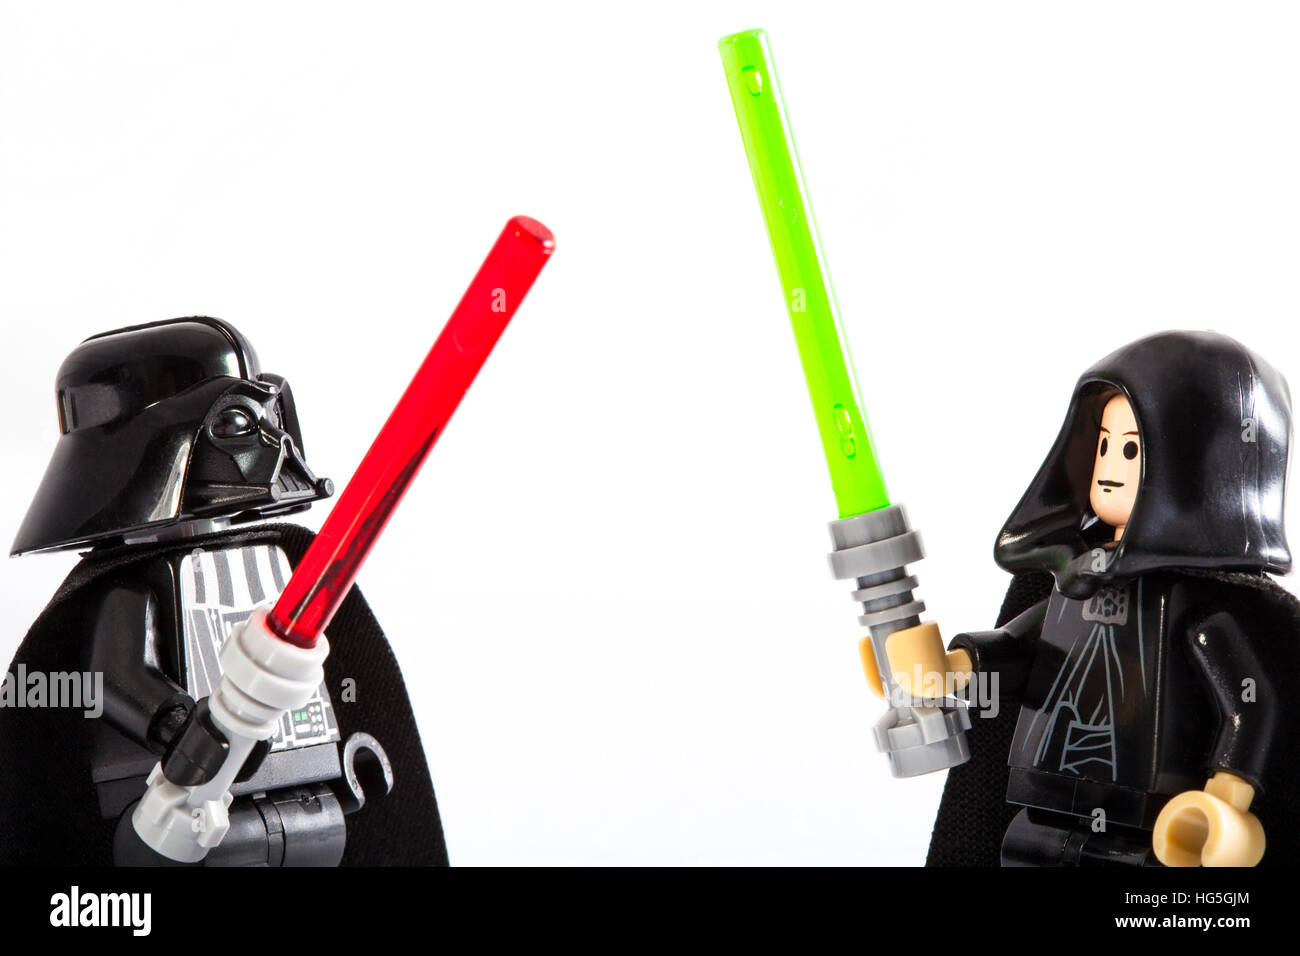 LONDON, UK - OCTOBER 15TH 2015: Lego minifigure toys of Star Wars  characters Darth Vader and Luke Skywalker, on 15th October 2015 Stock Photo  - Alamy